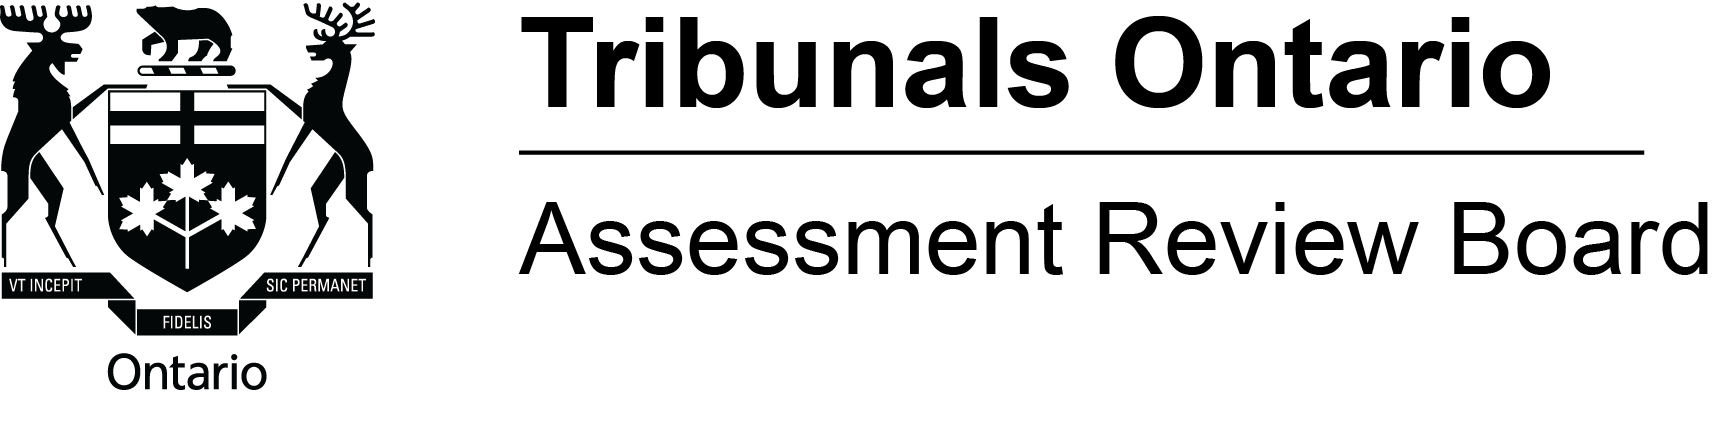 Government of Ontario. Tribunals Ontario. Assessment Review Board logo.